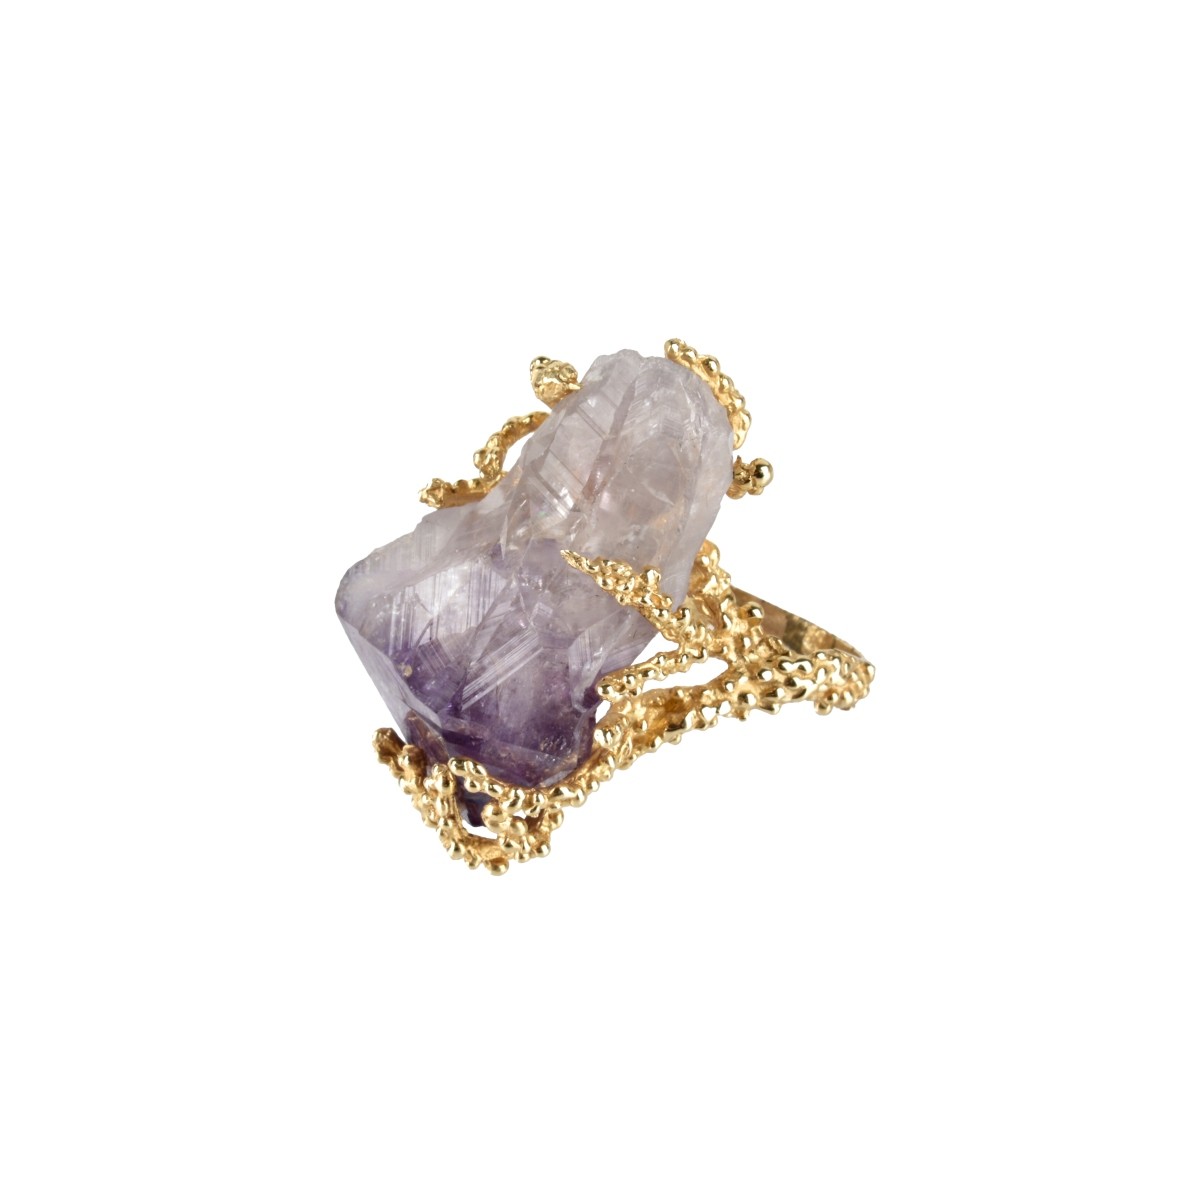 Amethyst and 14K Ring